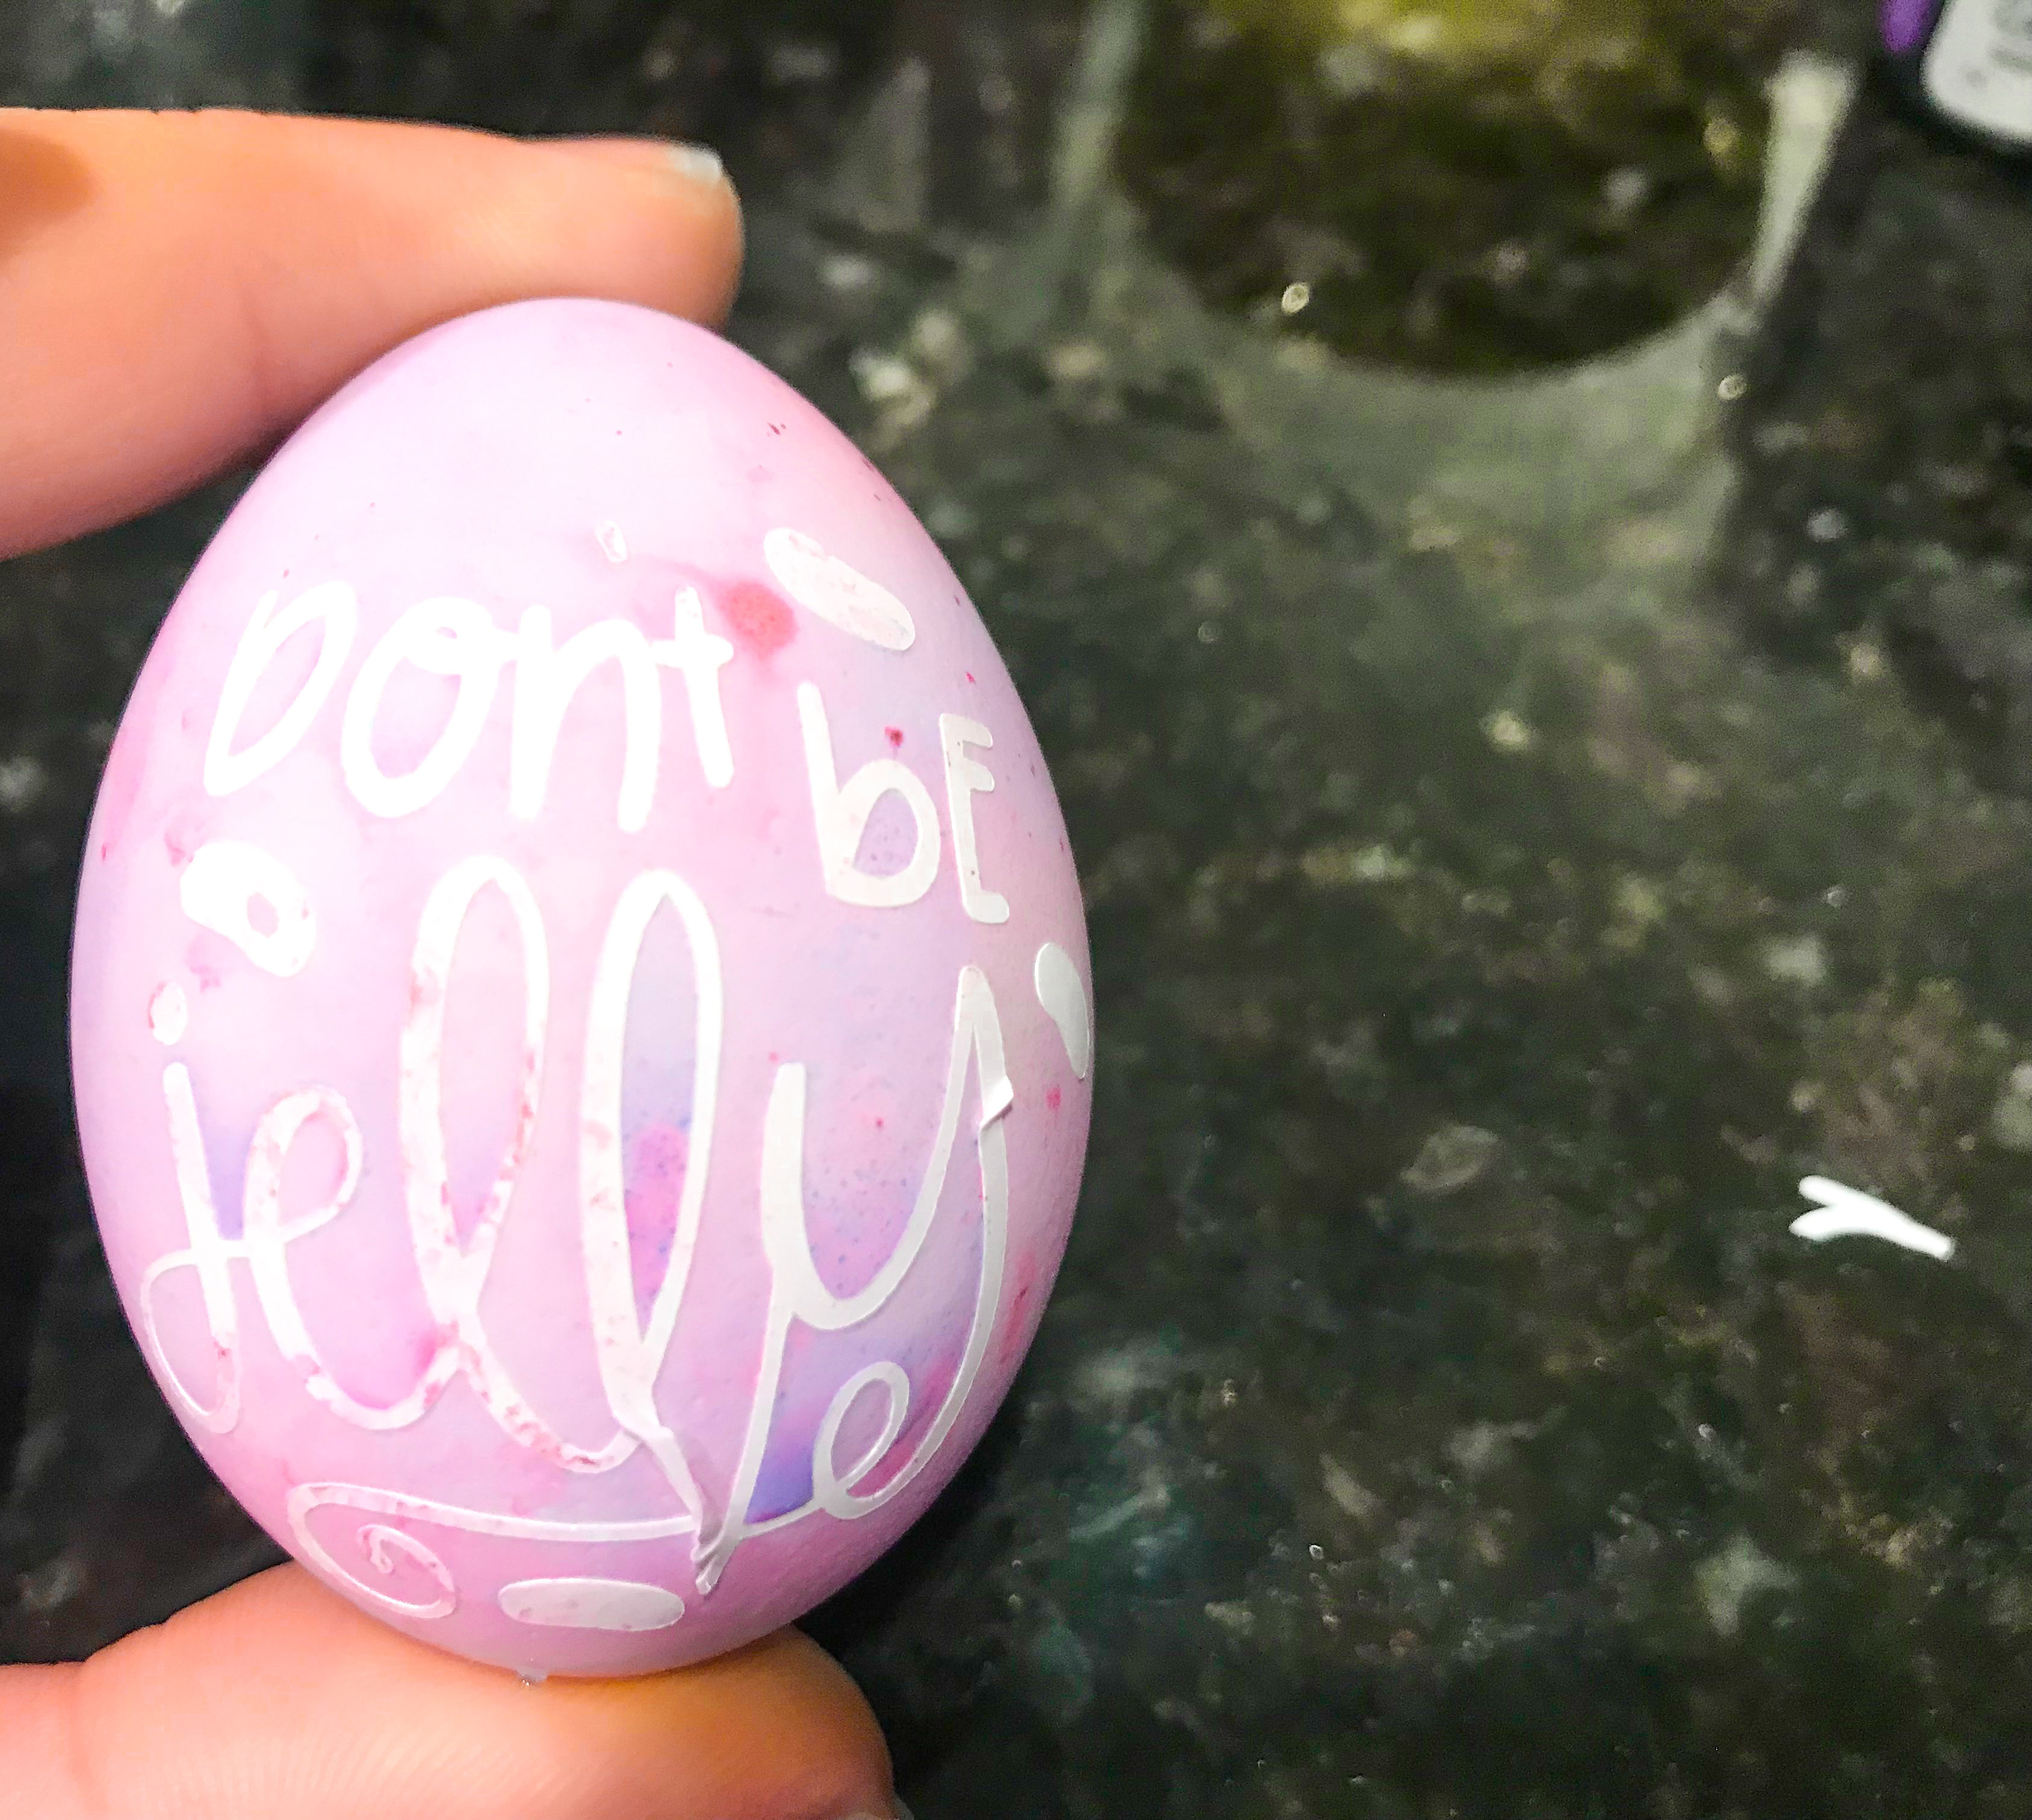 A vibrant easter egg which has had some of the vinyl peeled off.